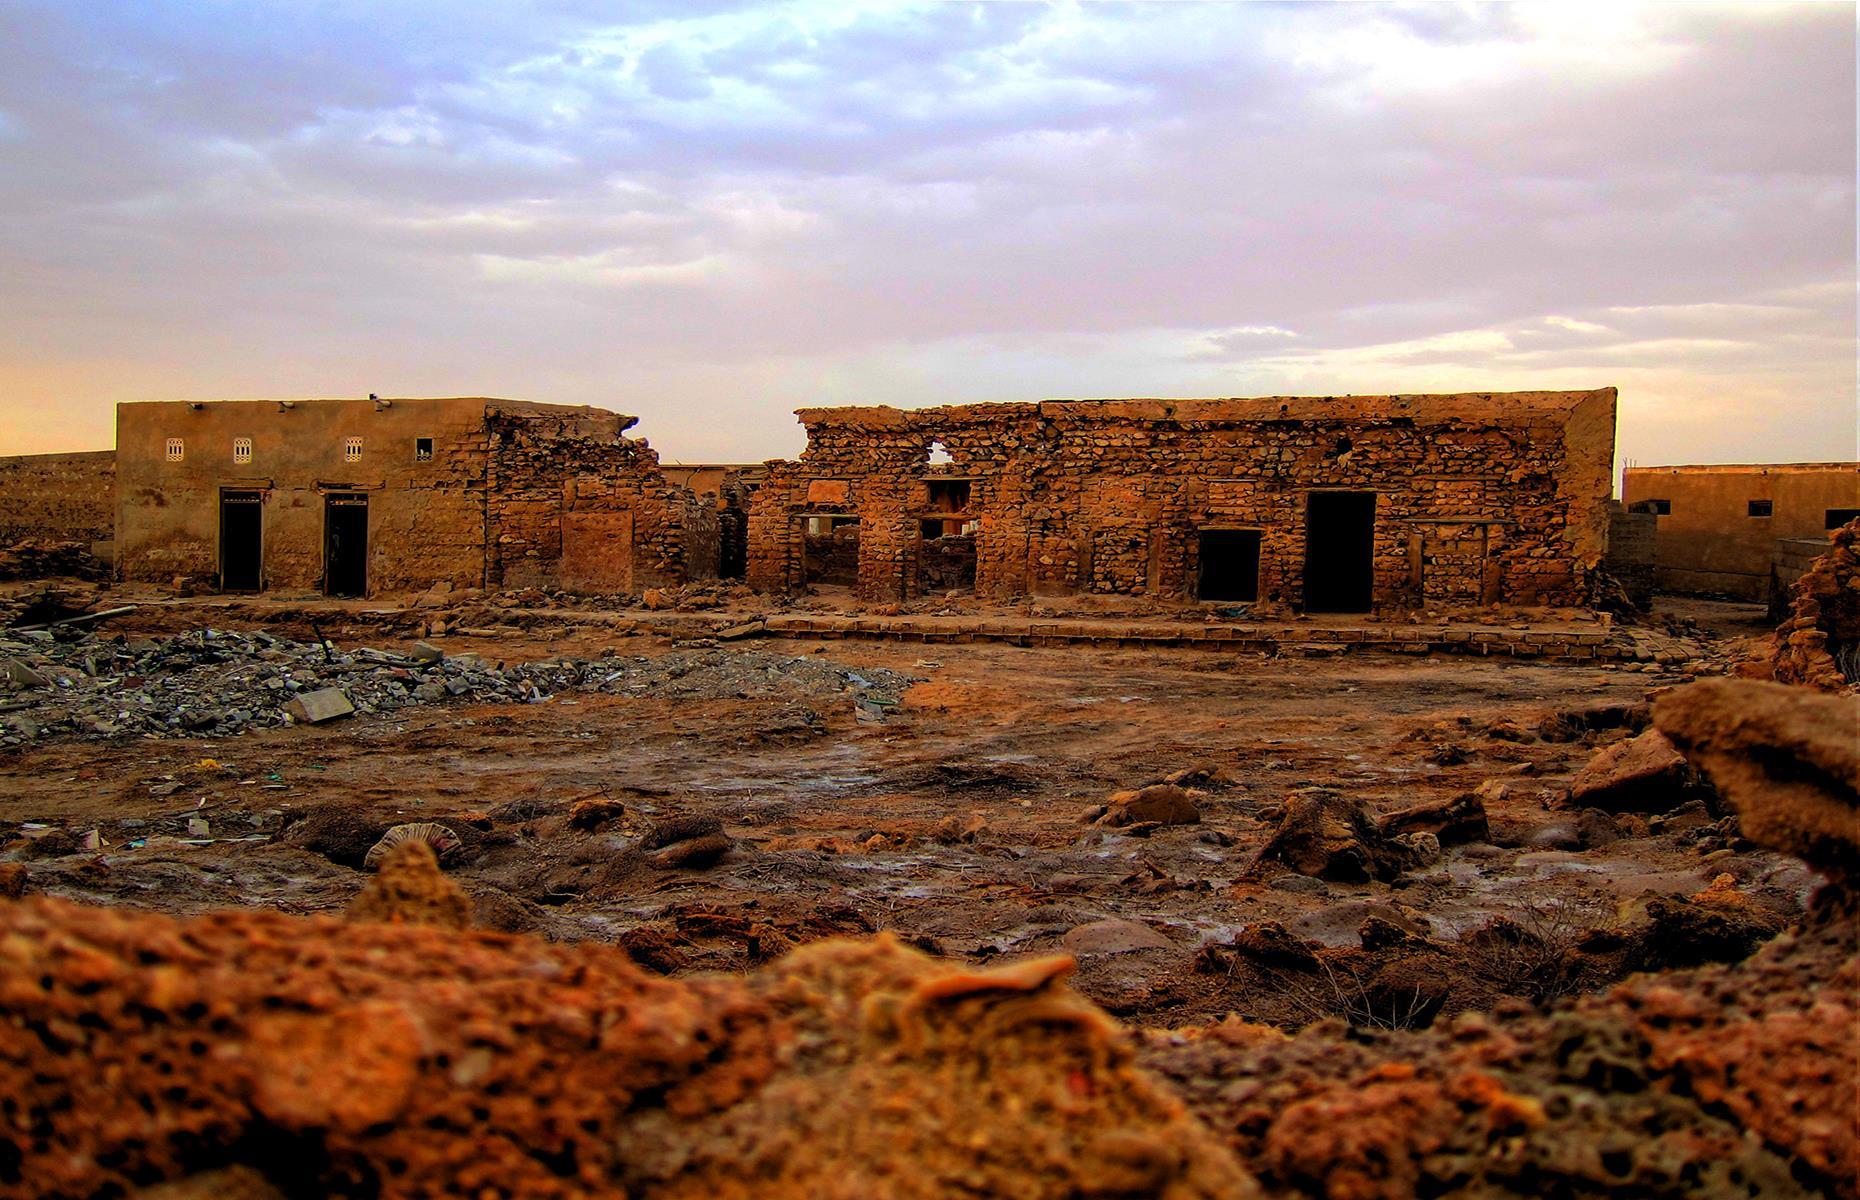 <p>The remnants of <a href="https://visitrasalkhaimah.com/discover/attractions/al-jazirah-al-hamra/">this historic pearling village</a> are quite a sight. Al Jazirah Al Hamra was deserted in the mid-20th century, most likely as residents went in search of a more modern way of life elsewhere. And, unsurprisingly, the deserted, sand-whipped streets have bred myths about ghosts and ghouls. Even without the supernatural, a walk through this abandoned town hewn from coral stone – with its sand-coloured houses, fortress and weathered mosques – is haunting enough.</p>  <p><strong><a href="https://www.loveexploring.com/galleries/114482/ghost-towns-hiding-in-the-worlds-deserts">Discover more ghost towns hidden in the world's deserts</a></strong></p>